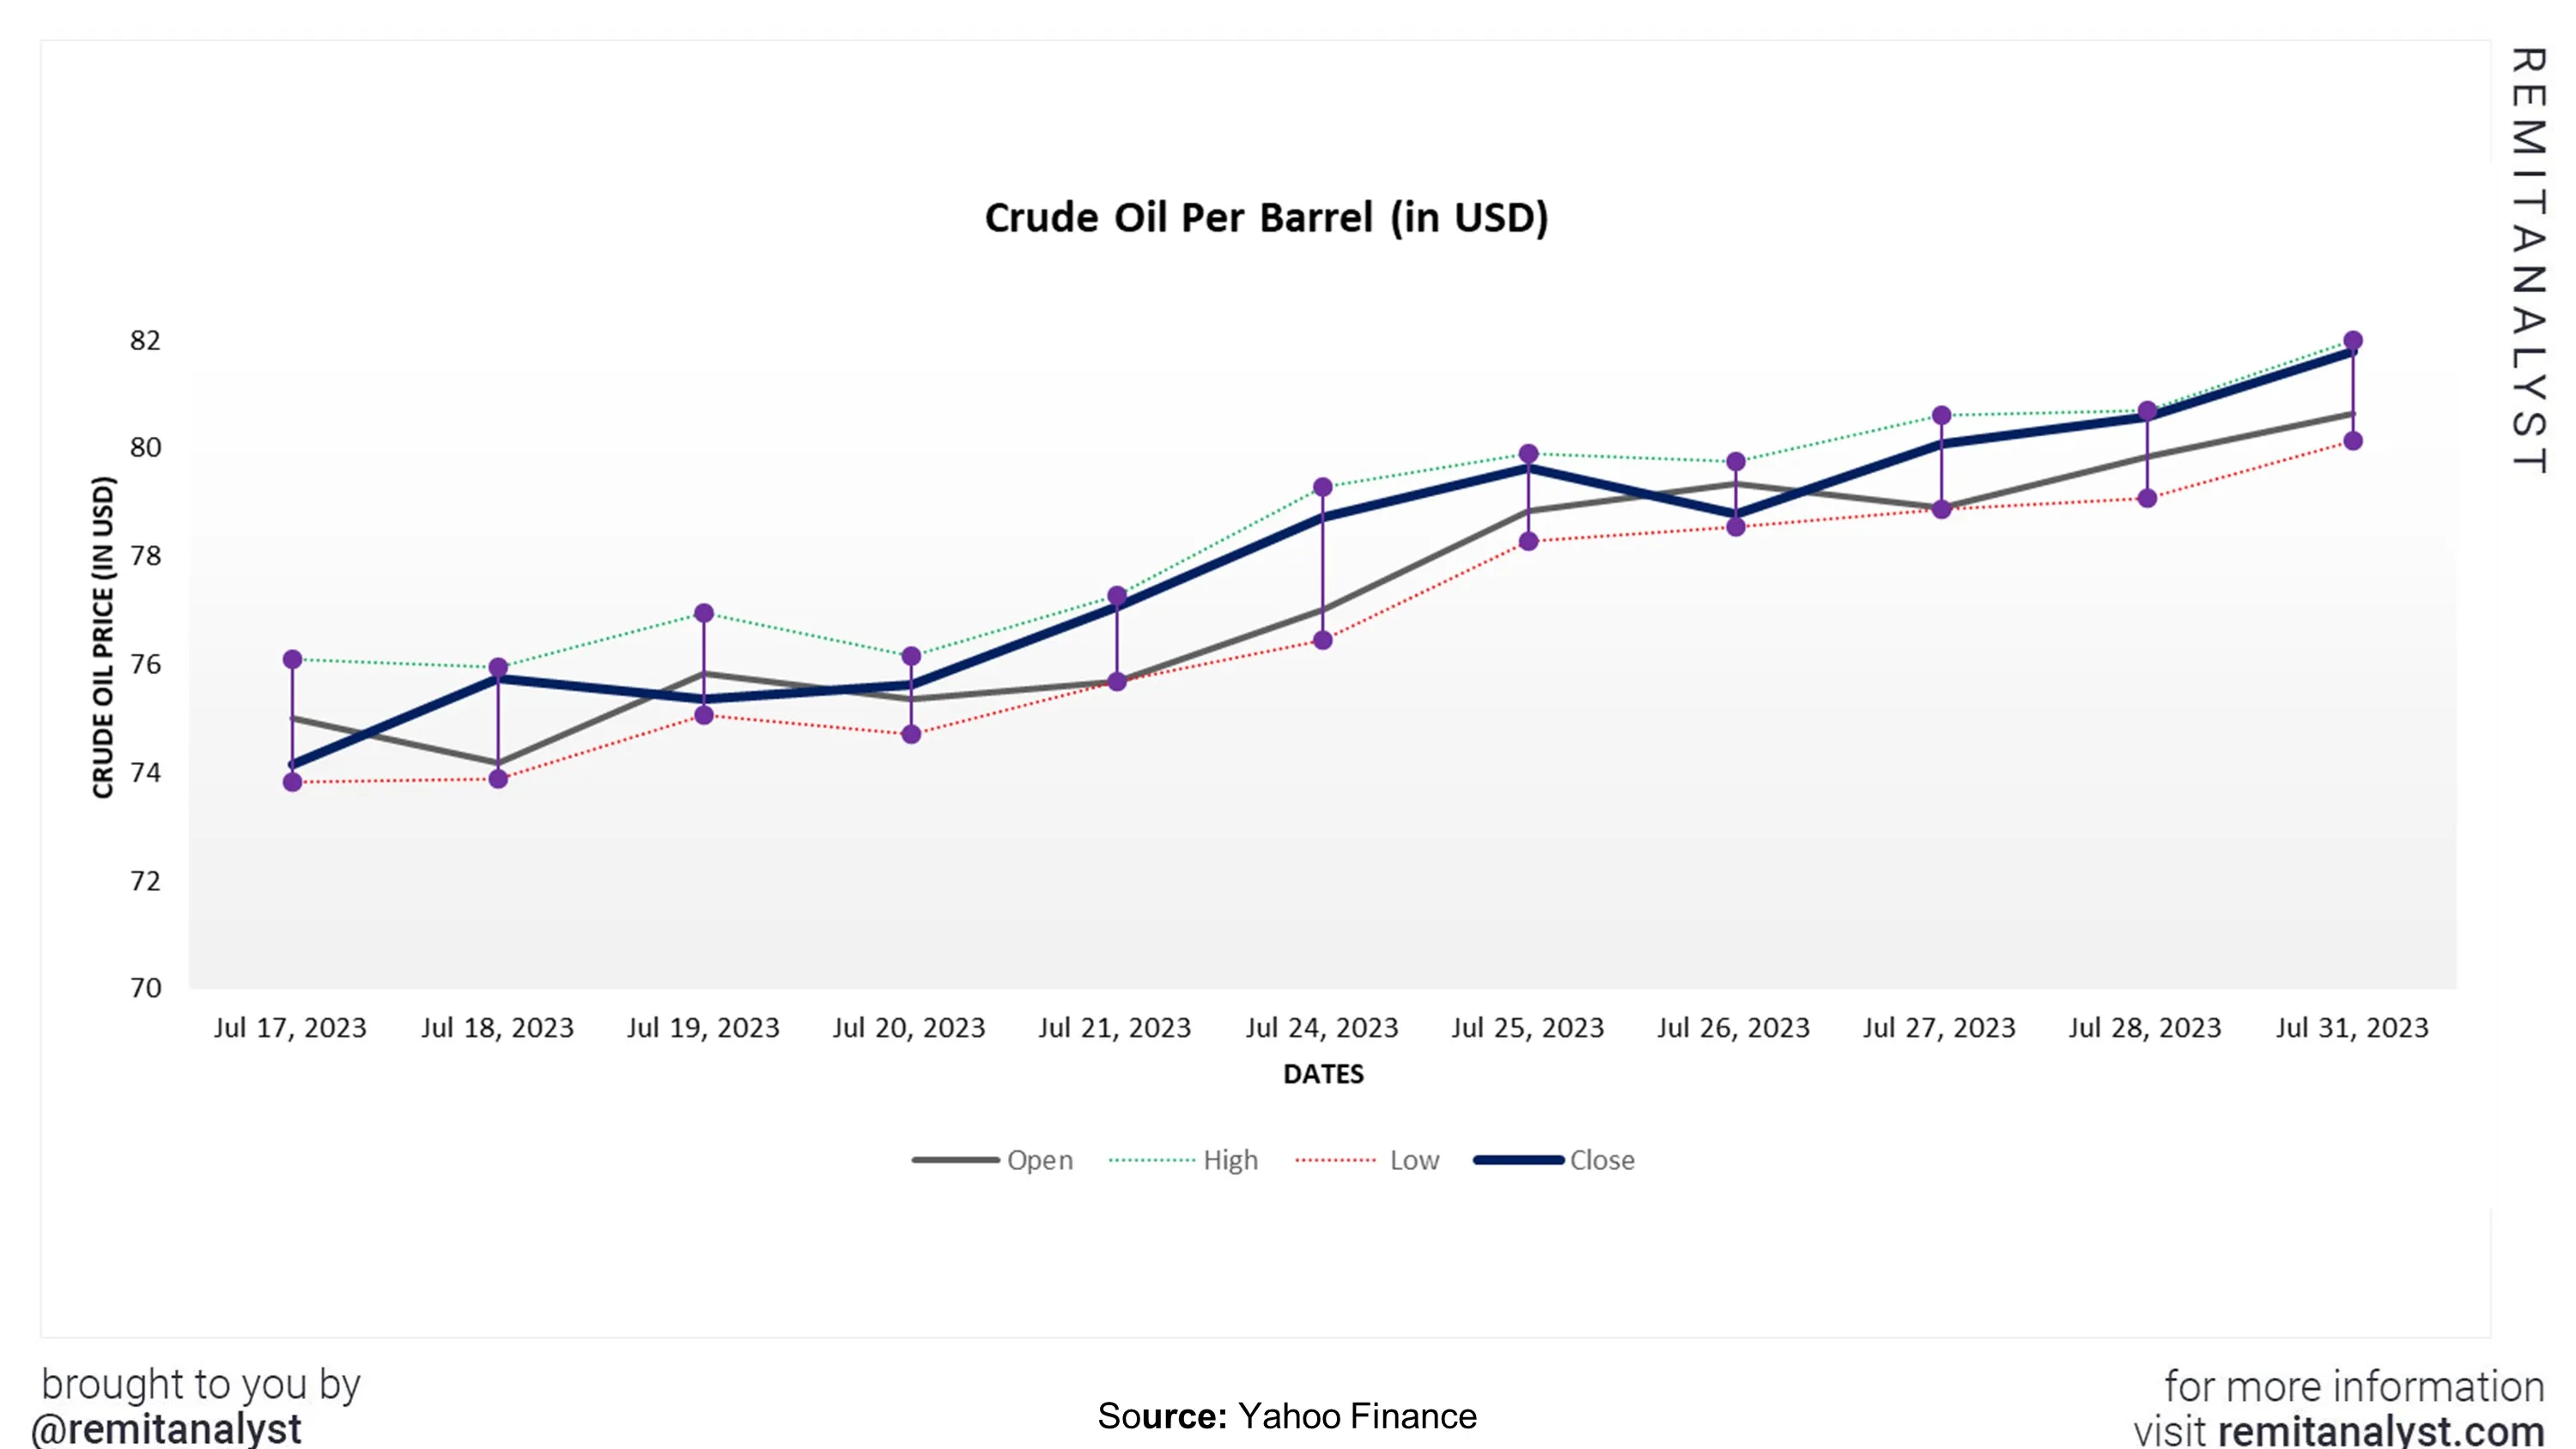 crude-oil-prices-from-17-jul-2023-to-31-jul-2023